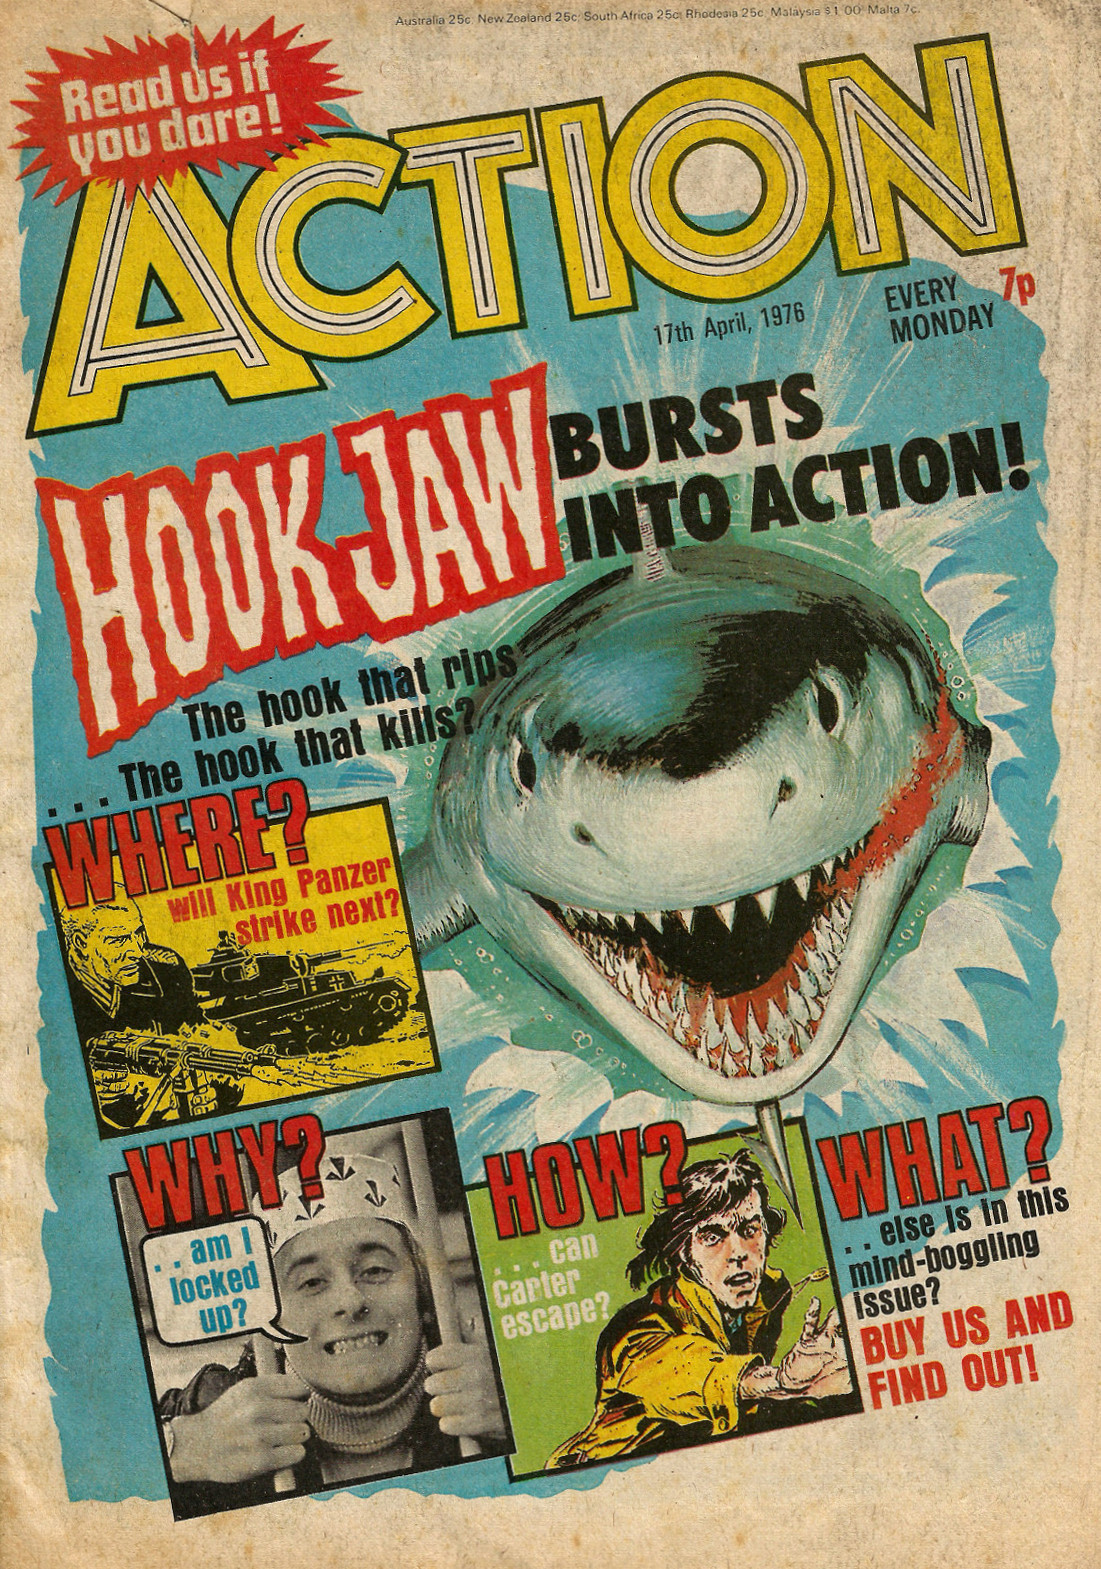 Action comic, 17th April 1976 (IPC Magazines).From 30th Century Comics in London.“Action